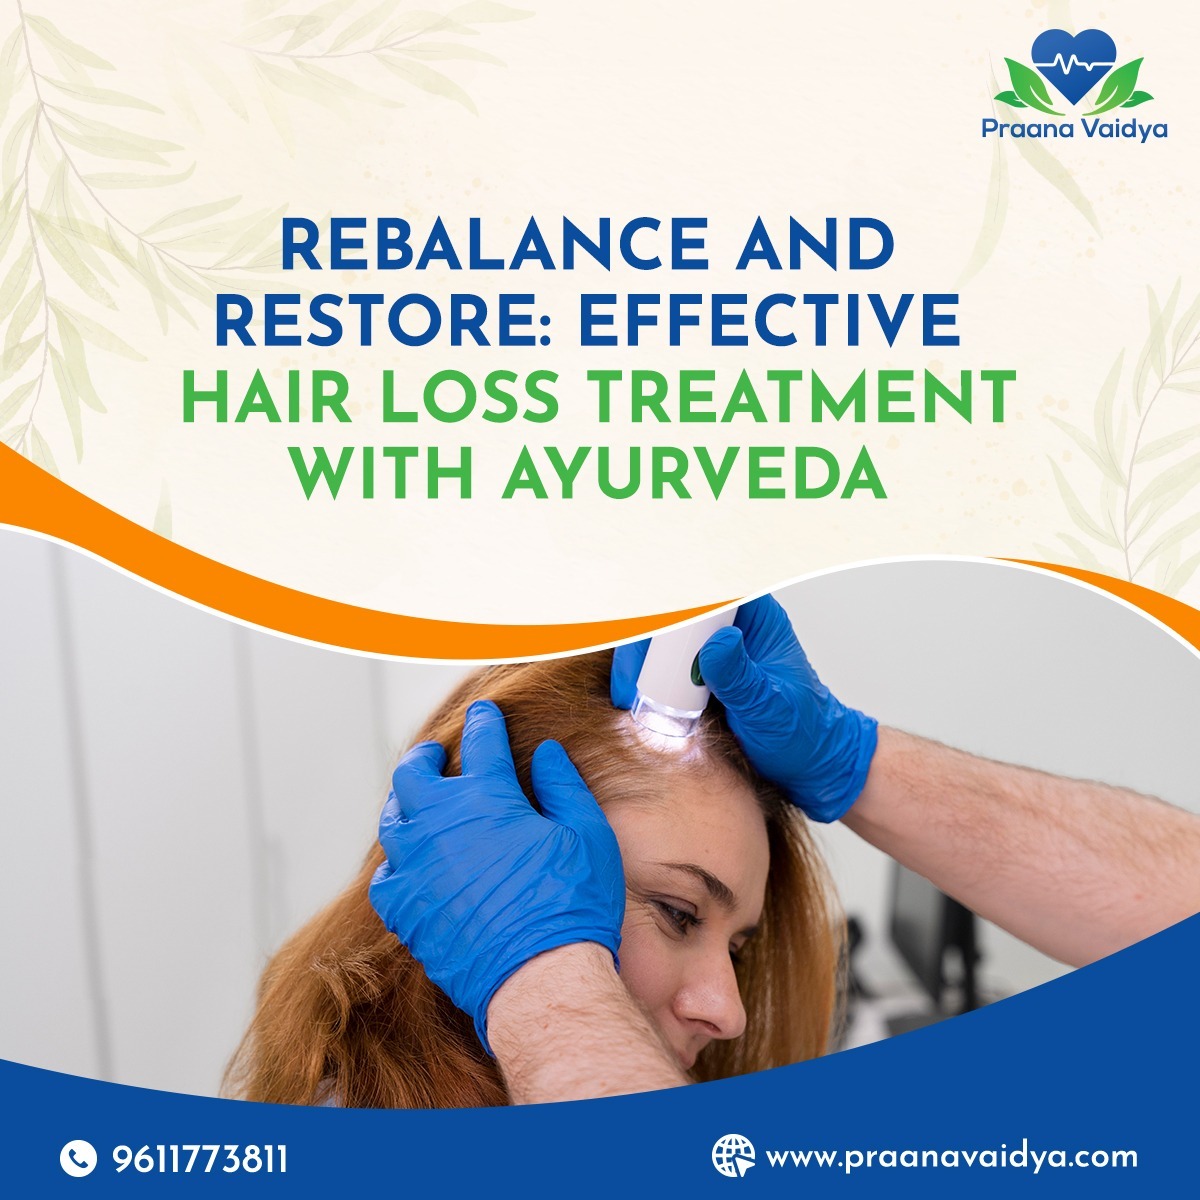 Rebalance and restore: Effective Hair Loss Treatment with Ayurveda